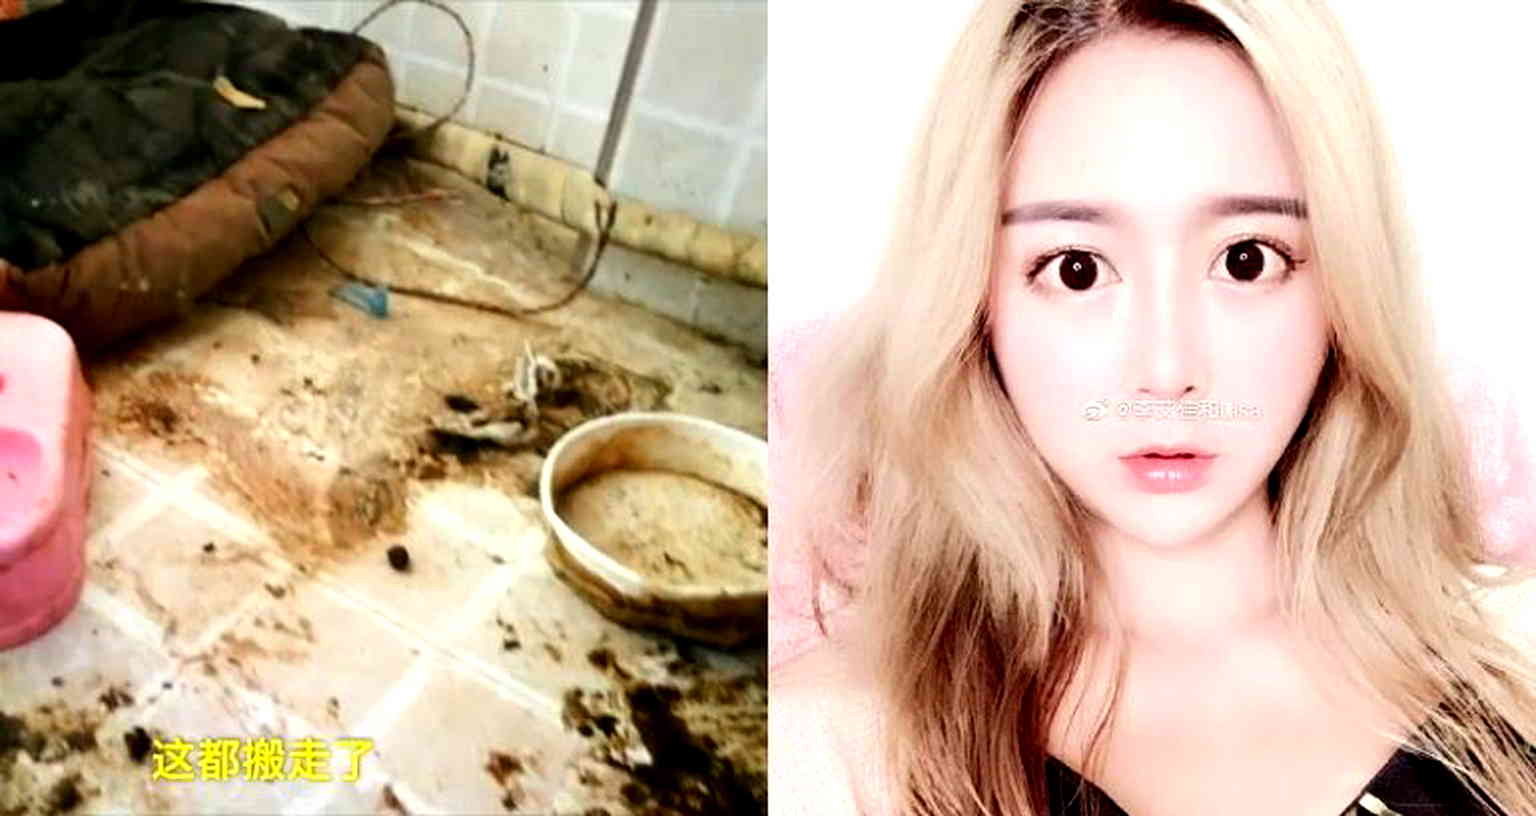 Landlady Exposes ‘Luxury’ Influencer’s Apartment Covered in Trash and Dog Feces